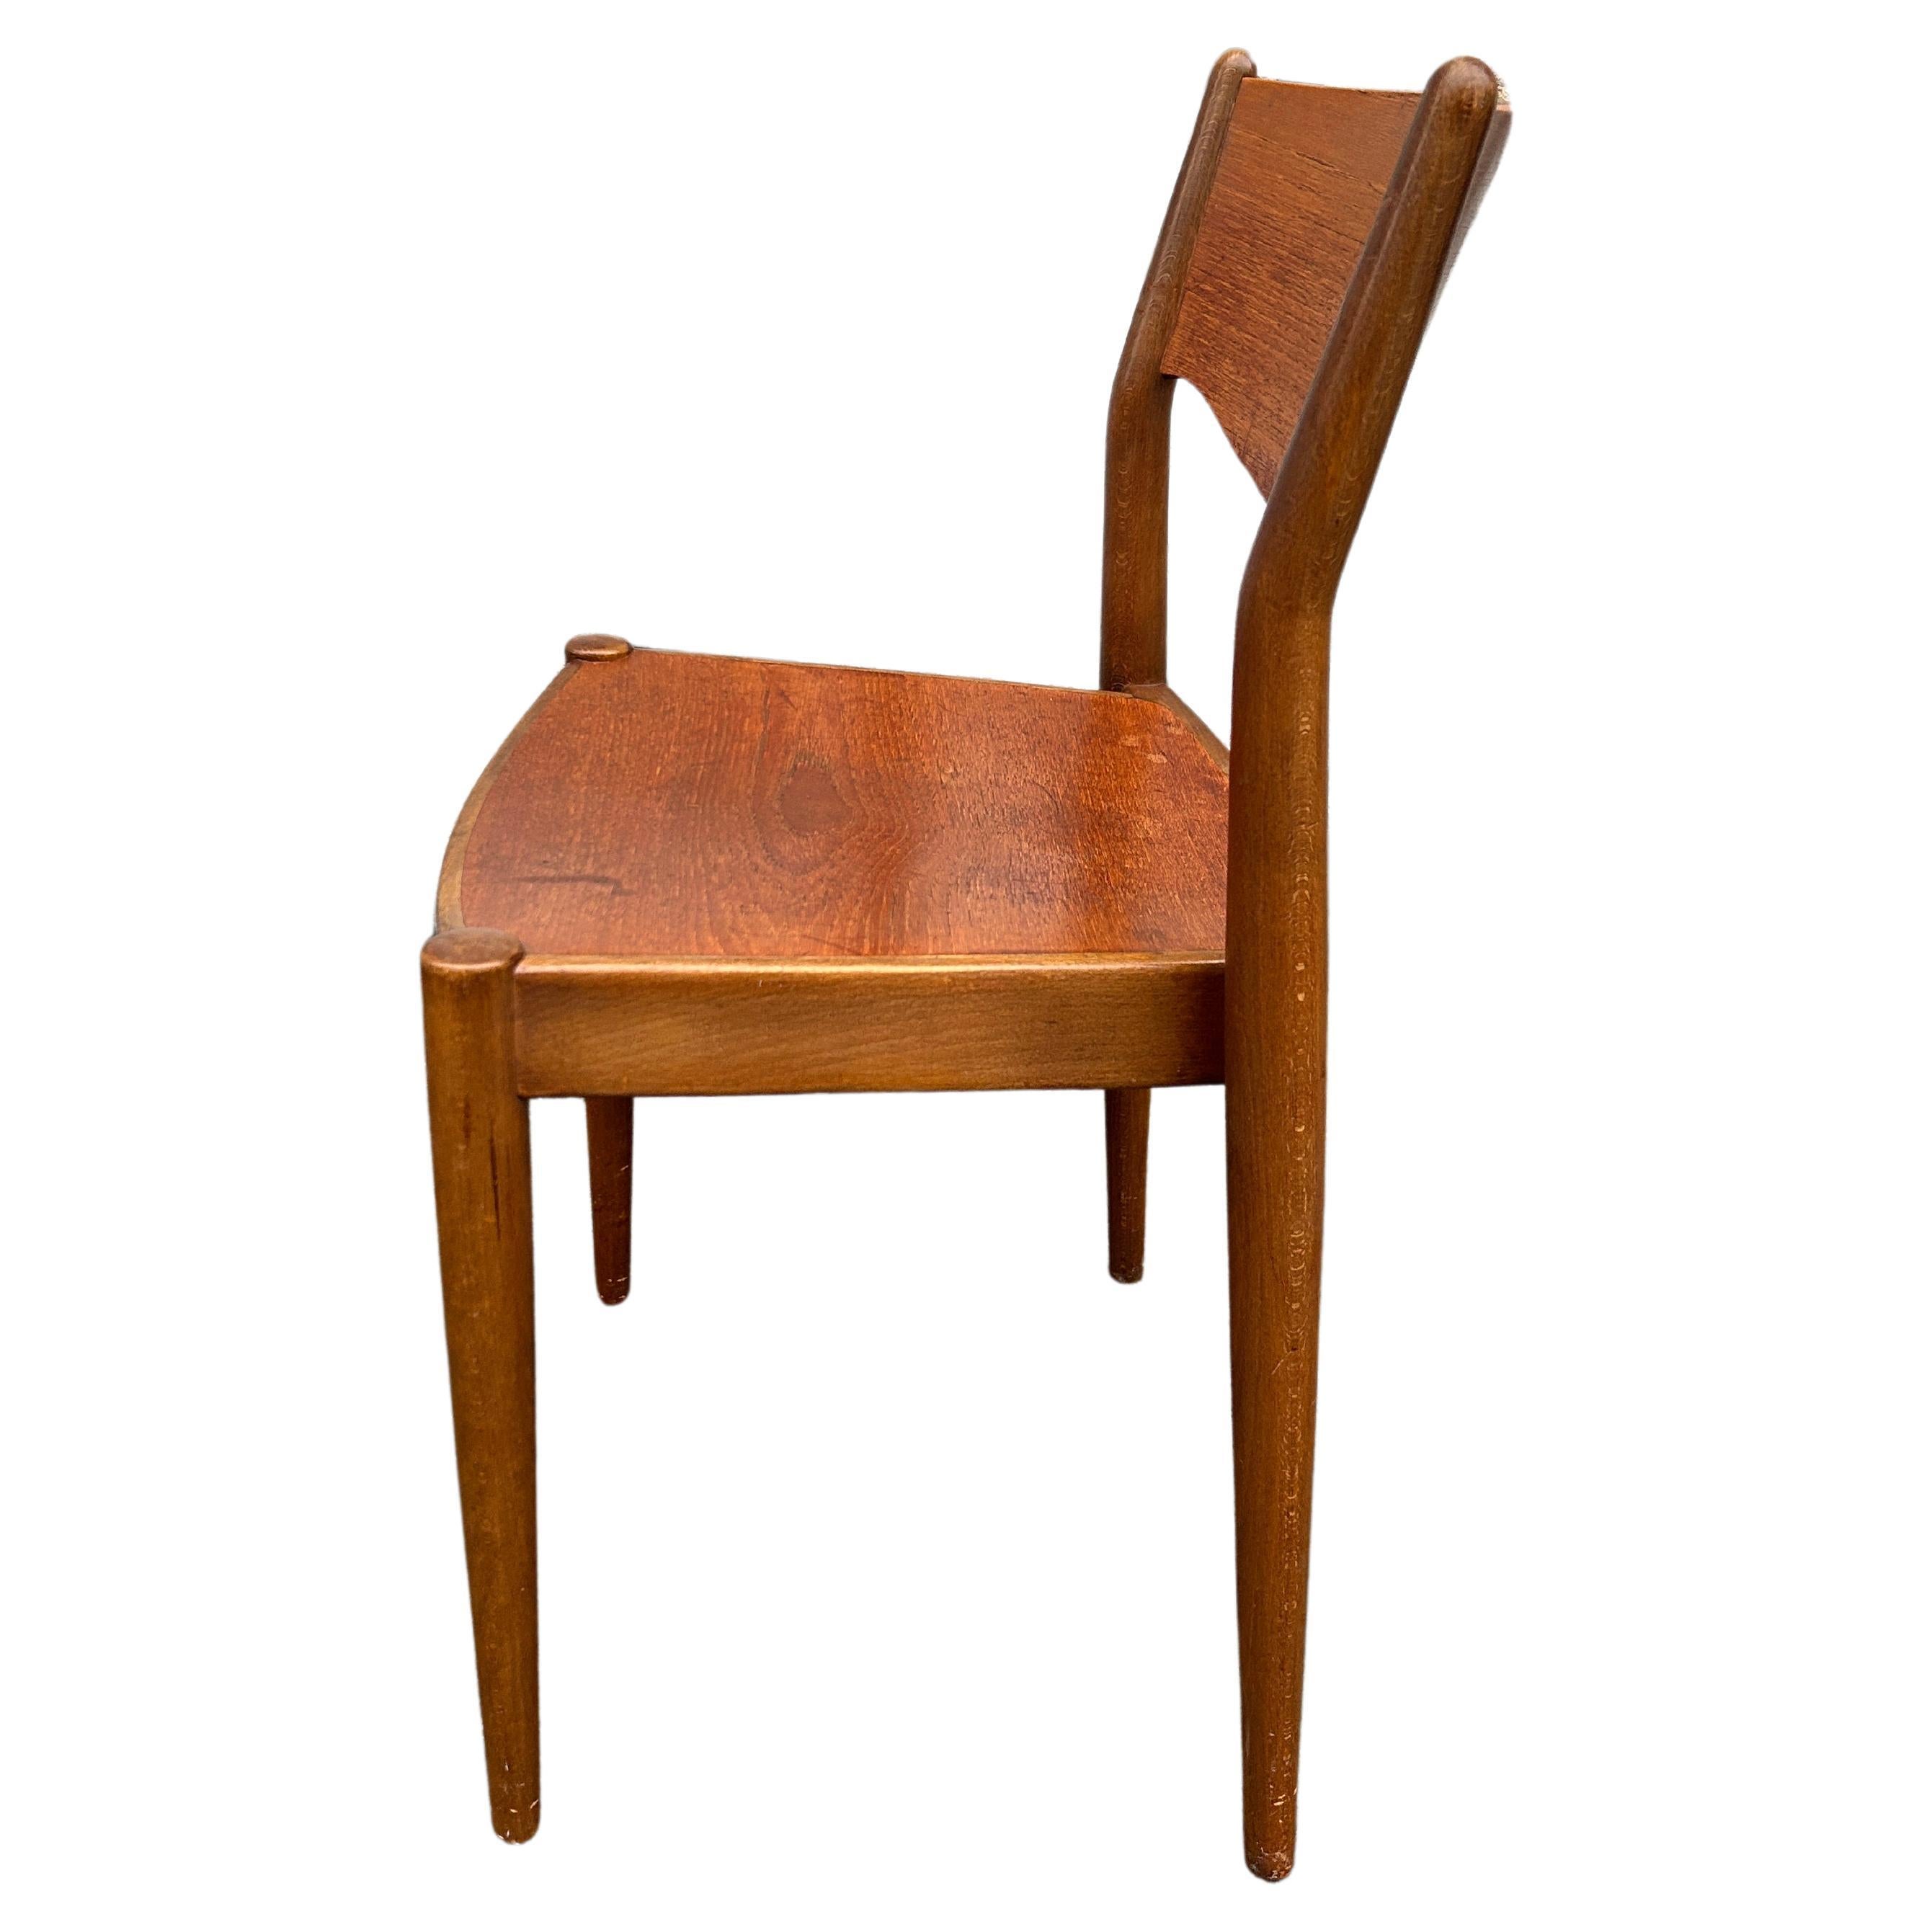 4 Borge Mogensen Stacking Danish Teak Dining Chairs for C.M. Madsen In Good Condition For Sale In BROOKLYN, NY